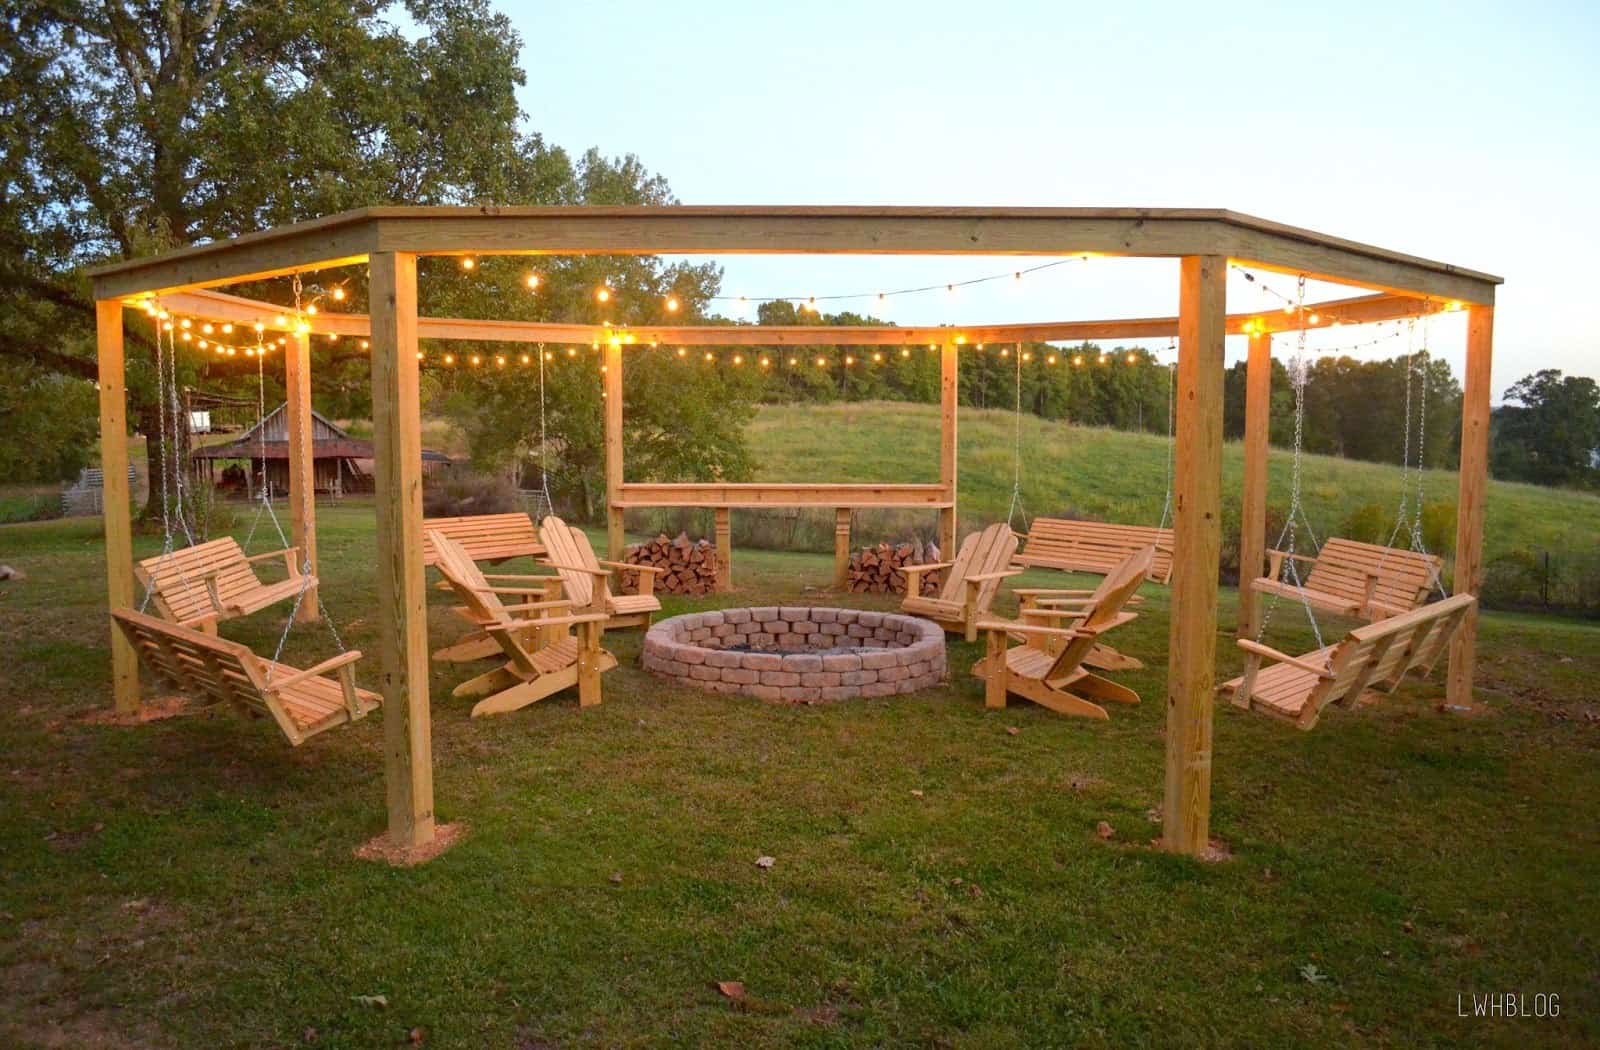 Open top pergola with a fire pit and swing seats